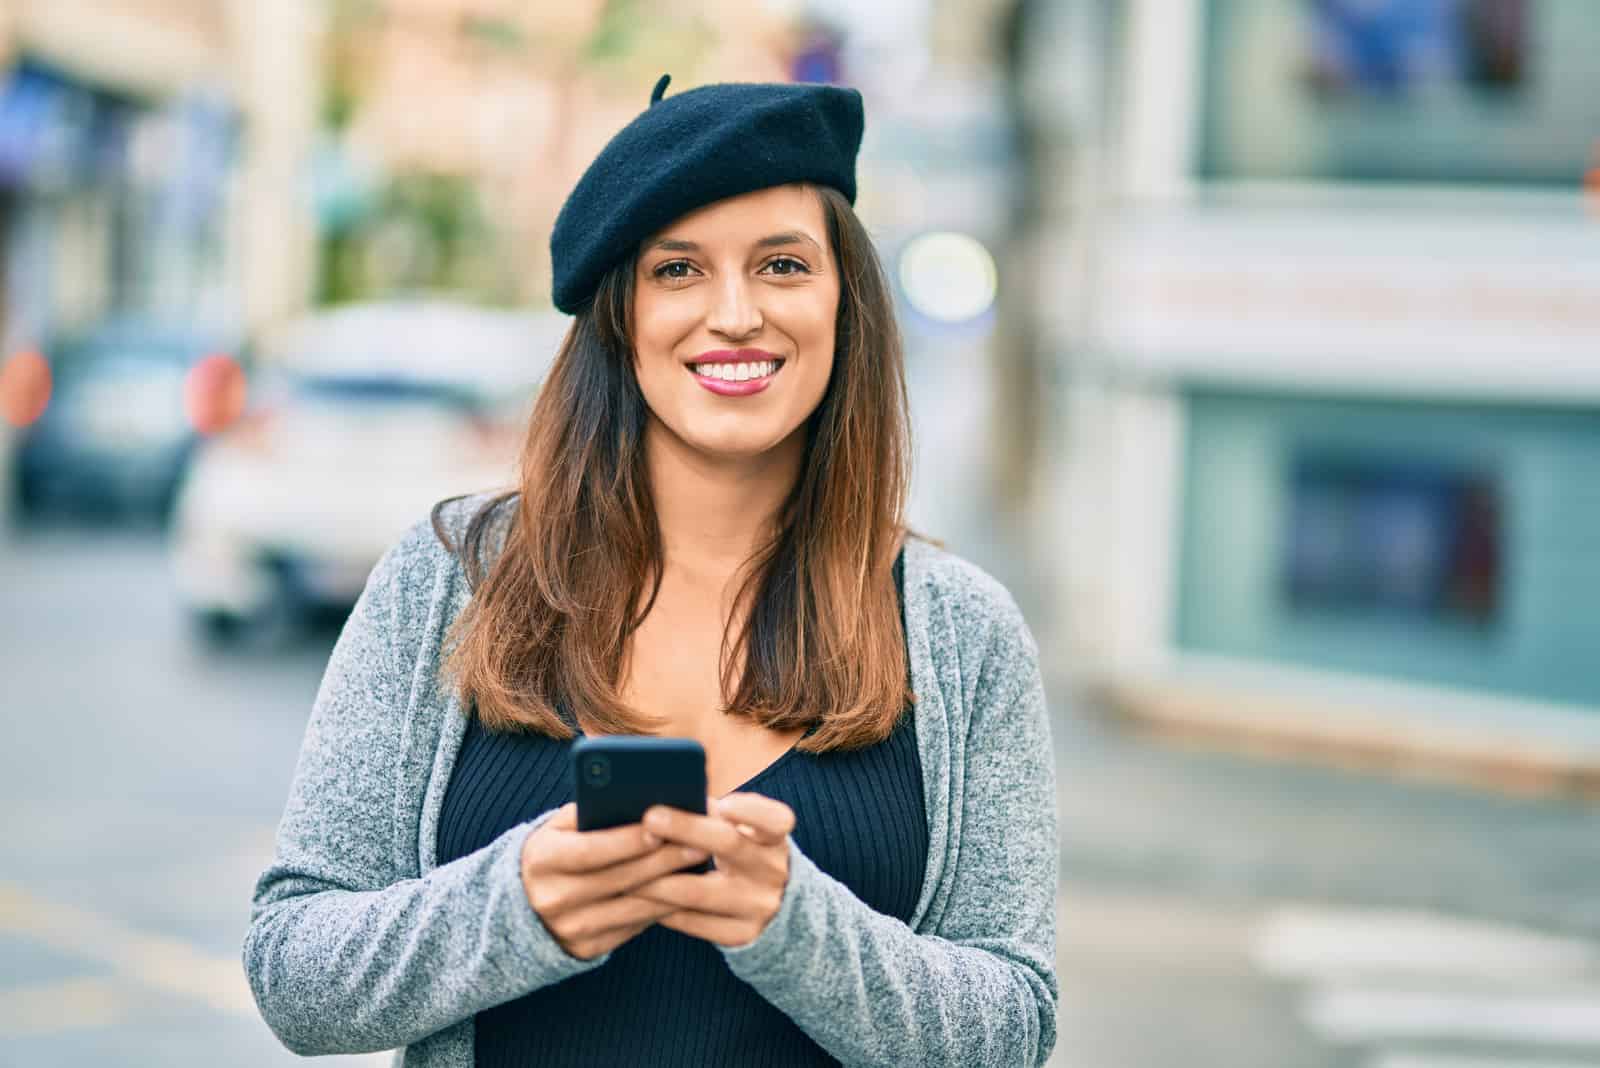 a smiling woman with long brown hair stands in the street with a phone in her hand